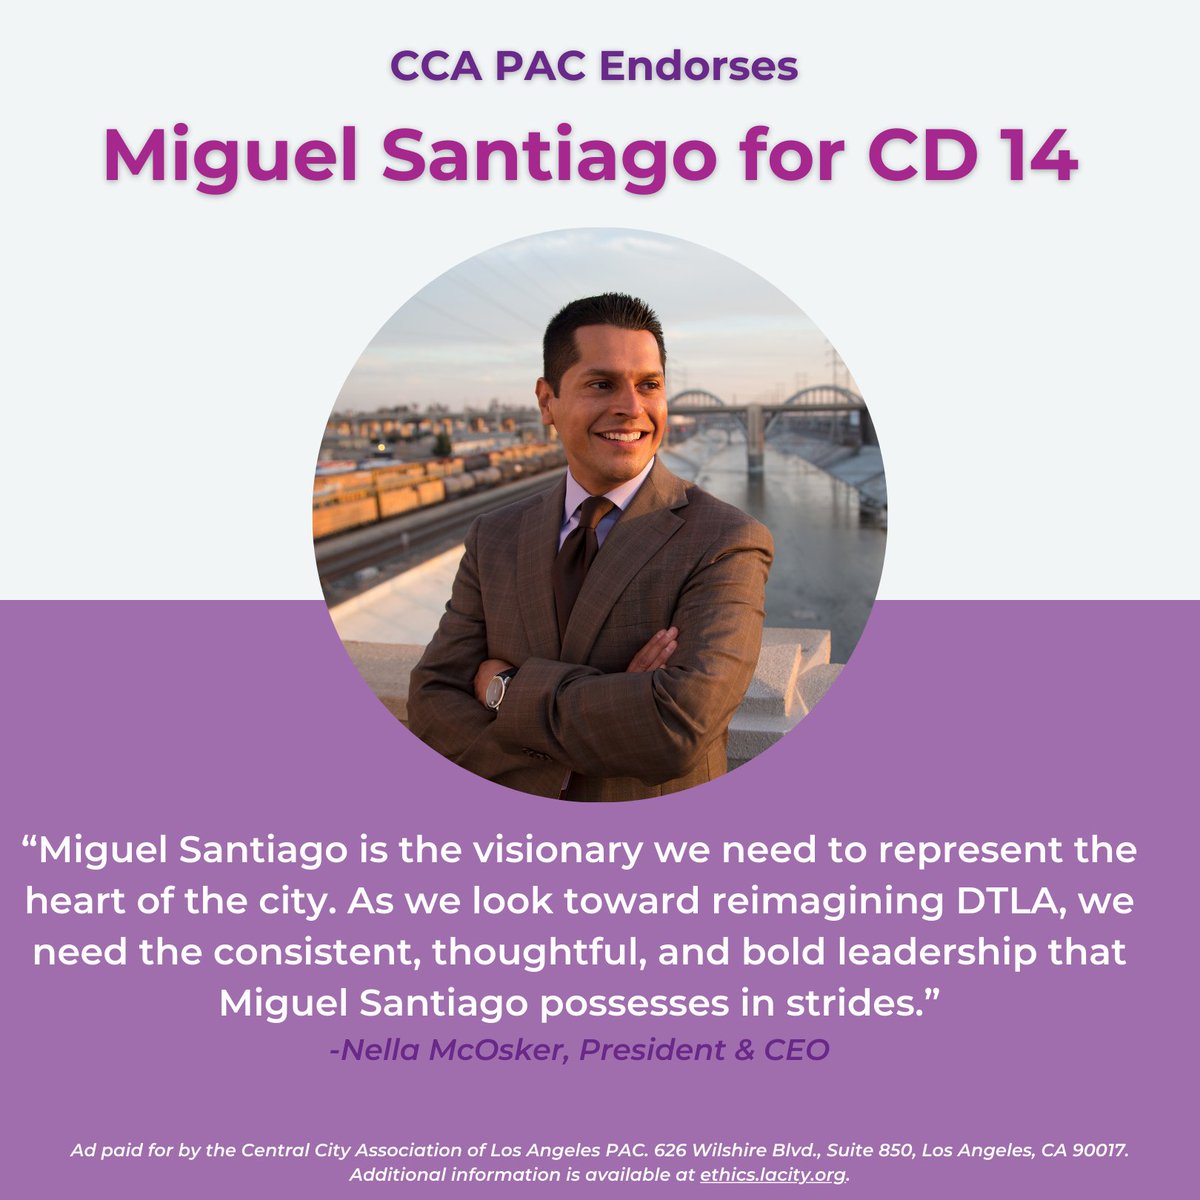 CCA PAC endorses Miguel Santiago for CD14: “Miguel Santiago is the visionary we need to represent the heart of the city. As we look toward reimagining DTLA, we need the consistent, thoughtful & bold leadership that Miguel Santiago possesses in strides.” -Nella McOsker Pres. & CEO